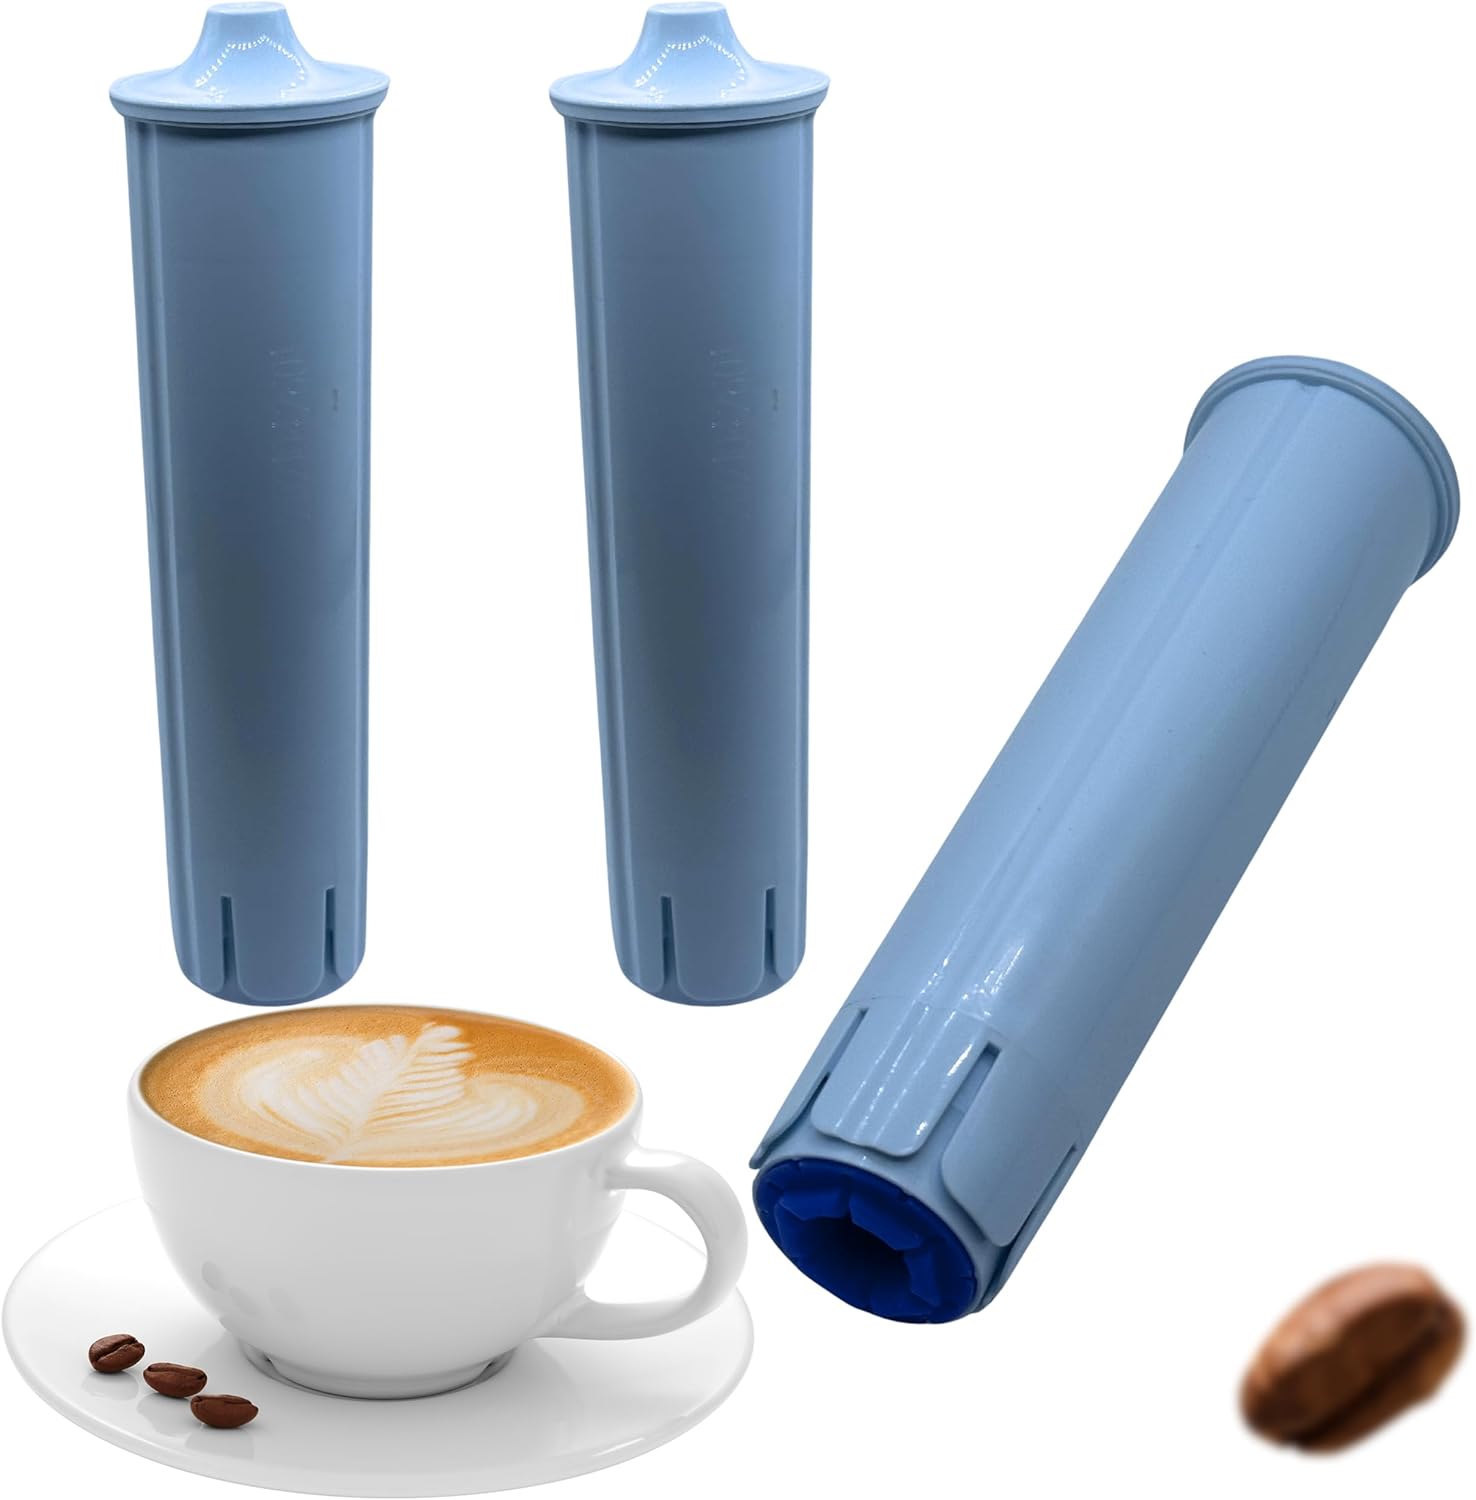 3 x EW24® Replacement Water Filter for Jura Blue 71312. Compatible with GIGA, ENA, Micro, IMPRESSA Series and J and F Series. Provides pure water and protects your coffee machine effectively.